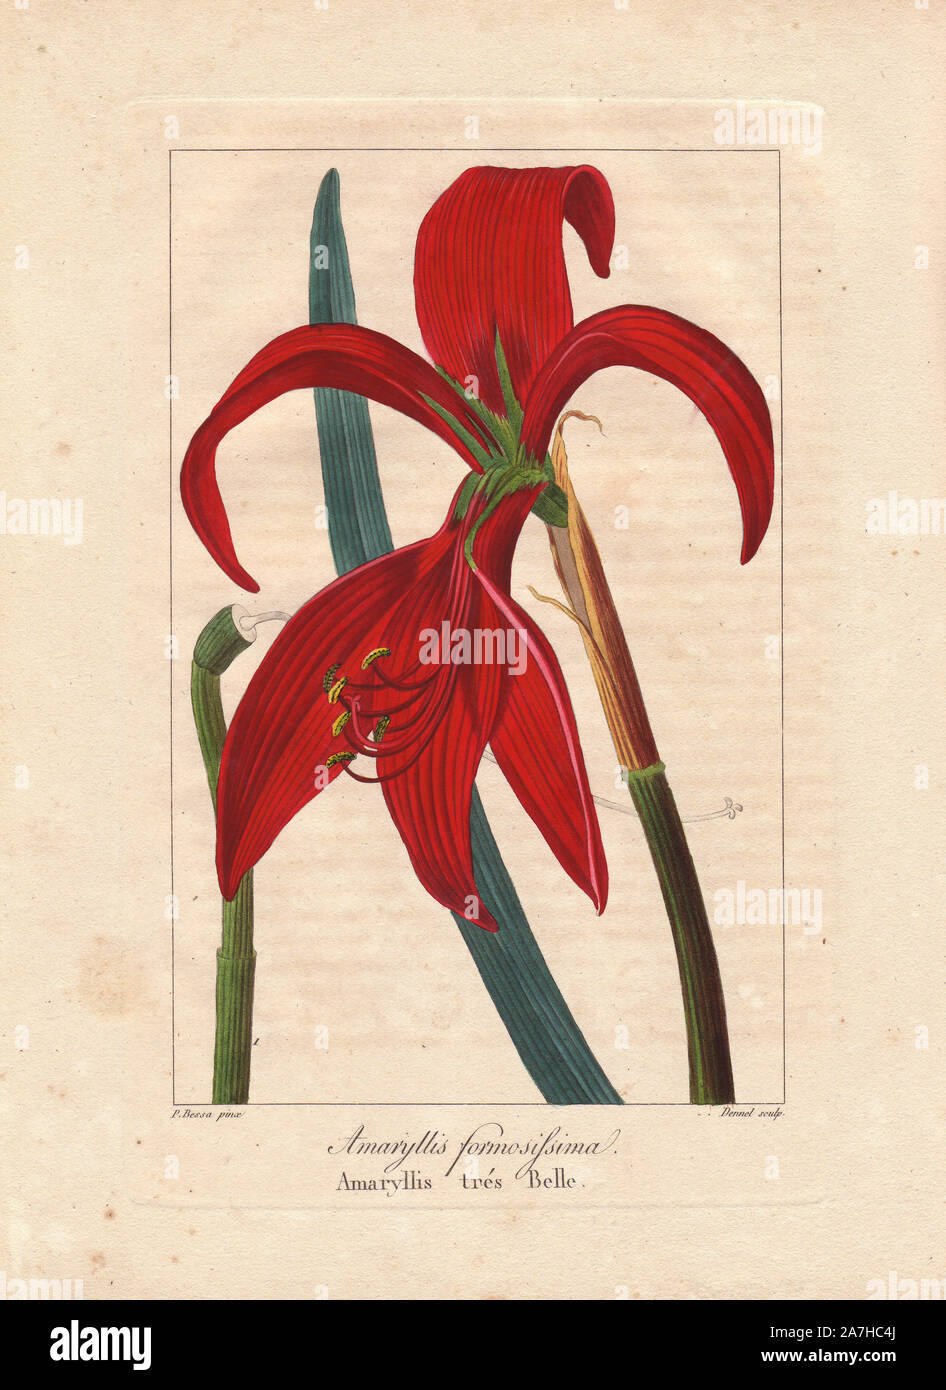 Aztec lily, Sprekelia formosissima, native to Mexico and Guatemala. Handcoloured stipple engraving on copper by Dennel from a botanical illustration by Pancrace Bessa from Mordant de Launay's 'Herbier General de l'Amateur,' Audot, Paris, 1820. The Herbier was published from 1810 to 1827 and edited by Mordant de Launay and Loiseleur-Deslongchamps. Bessa (1772-1830s), along with Redoute and Turpin, is considered one of the greatest French botanical artists of the 19th century. Stock Photo